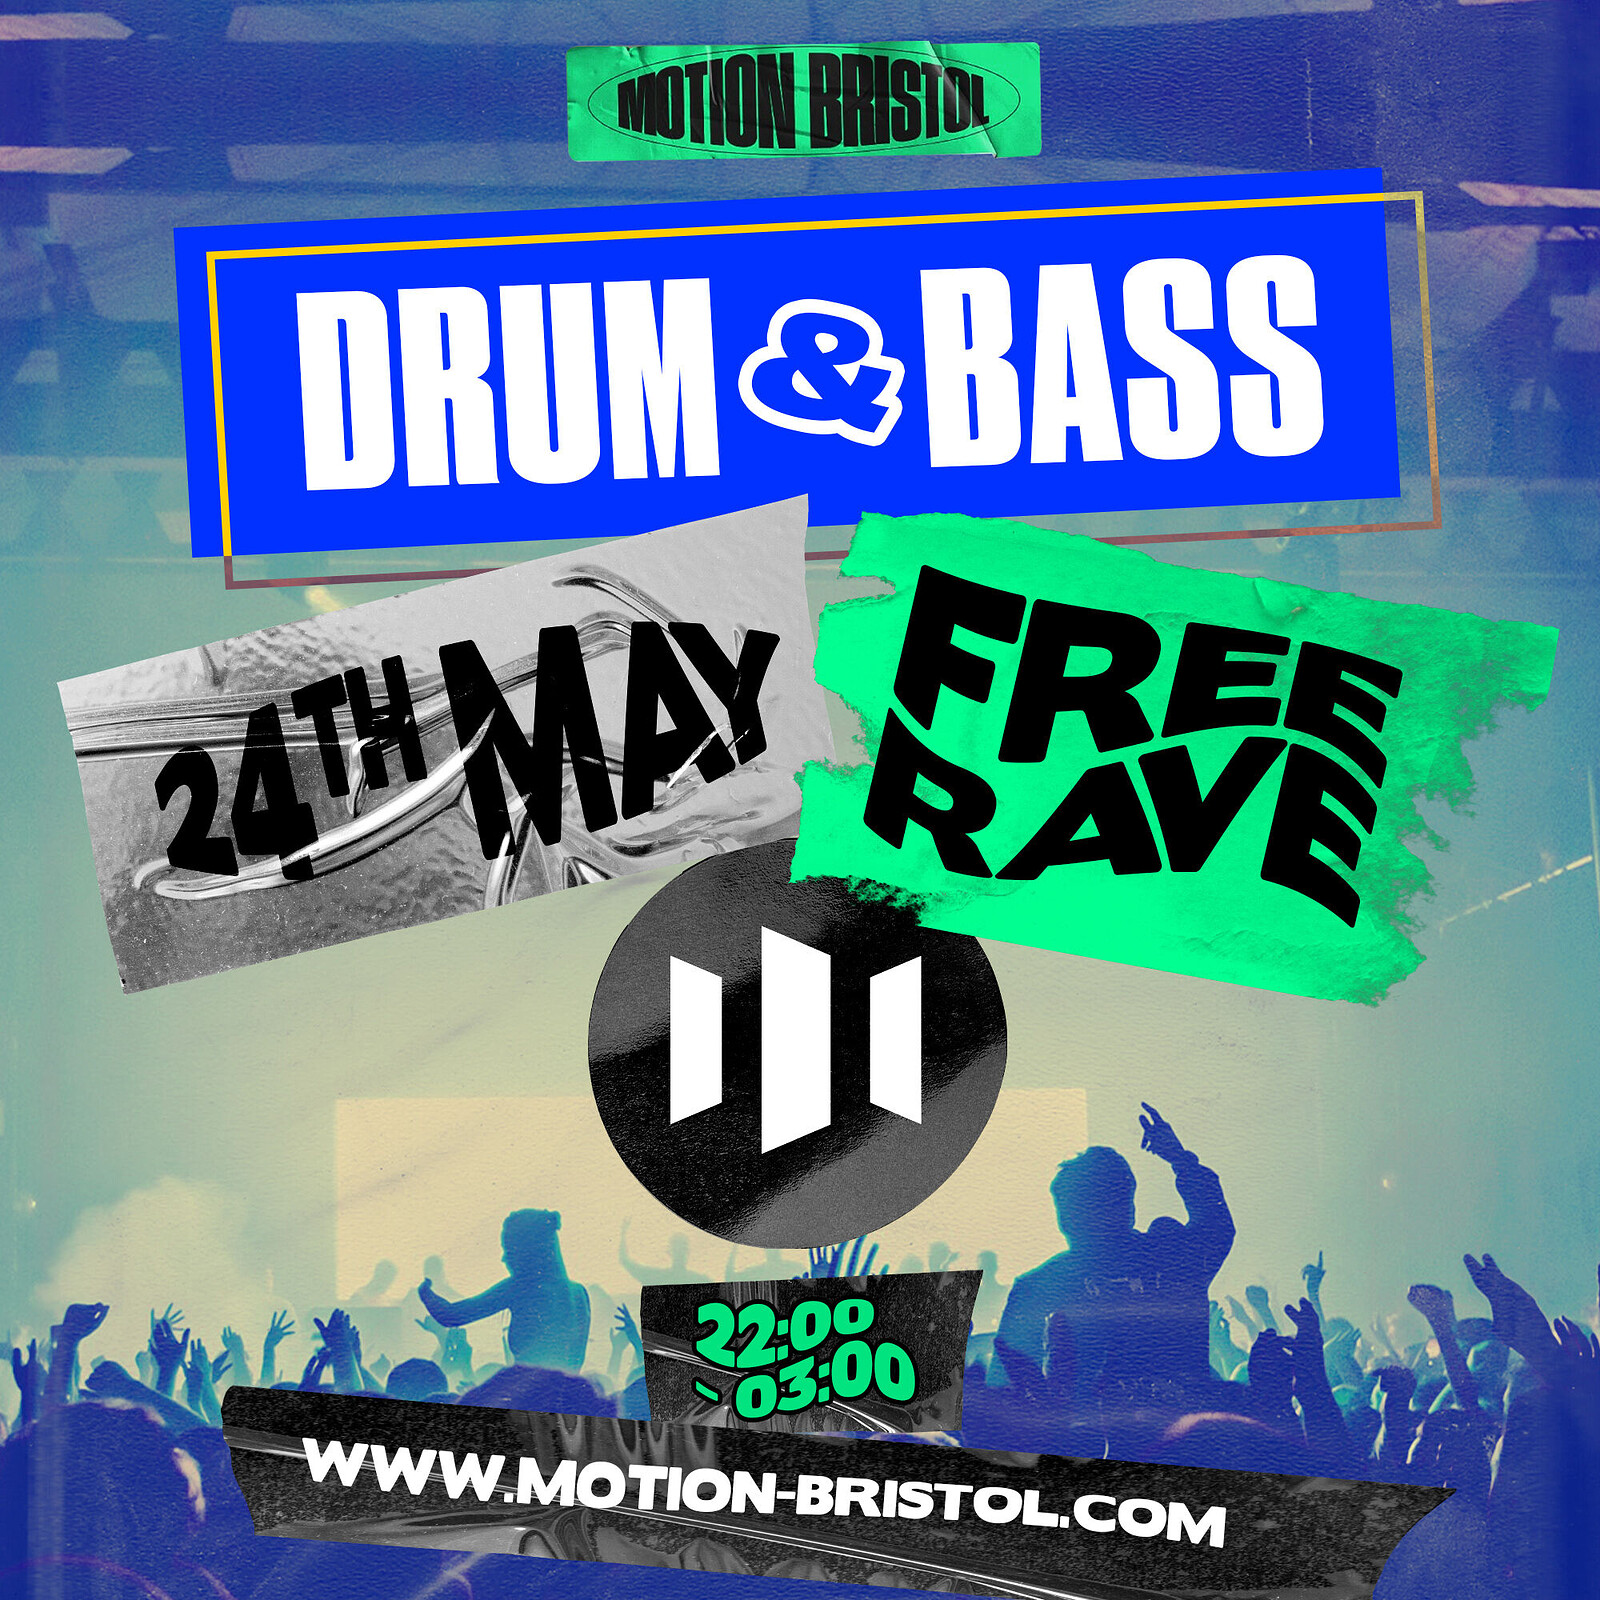 Motion Presents: Drum & Bass Rave at Motion